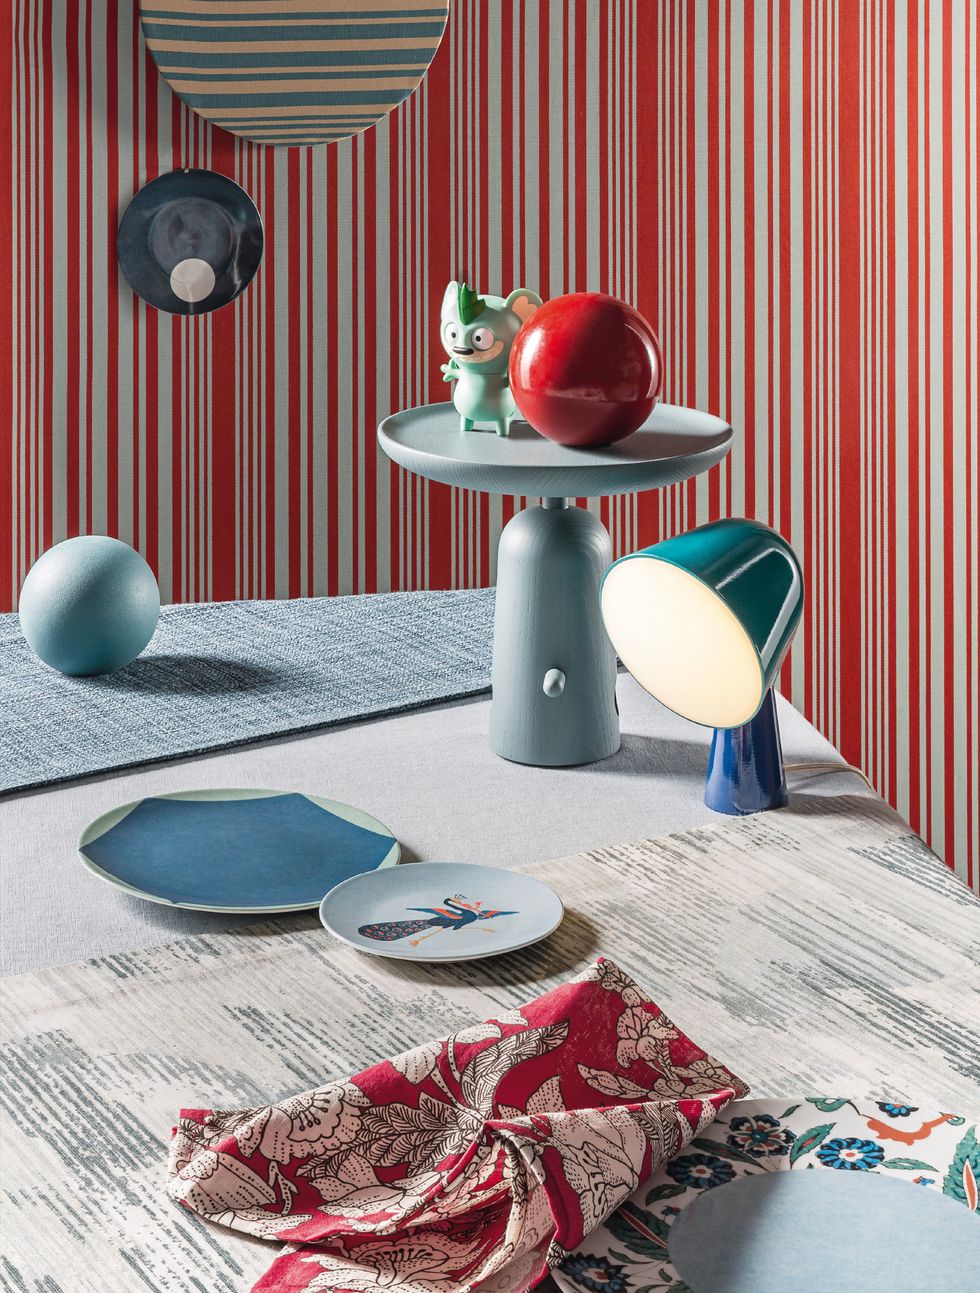 Tablecloth, Red, Blue, Room, Table, Furniture, Interior design, Textile, Linens, Curtain, 